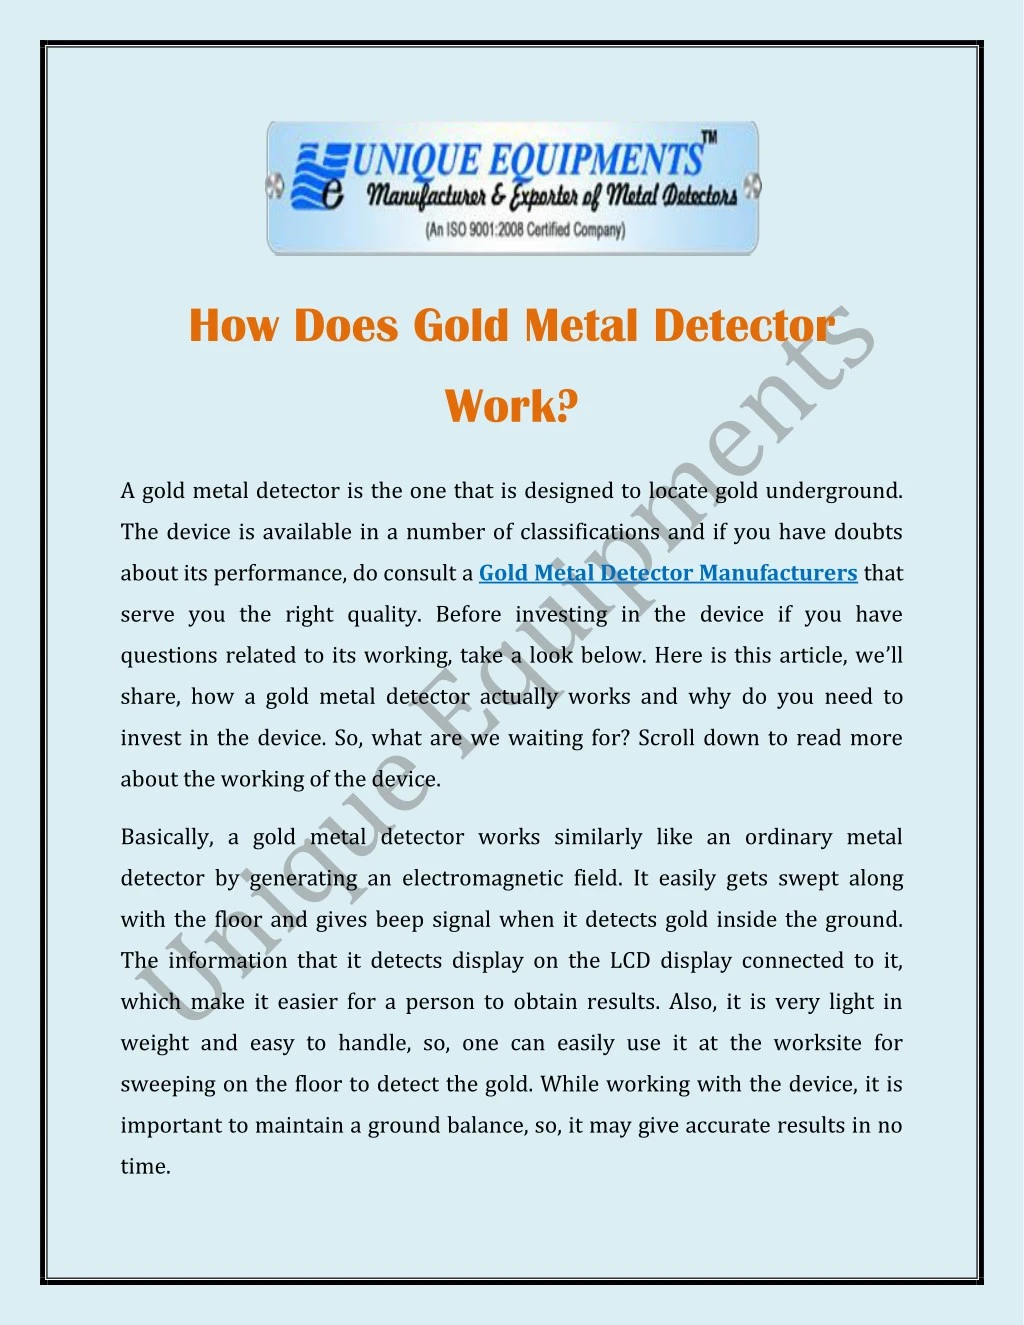 how does gold metal detector